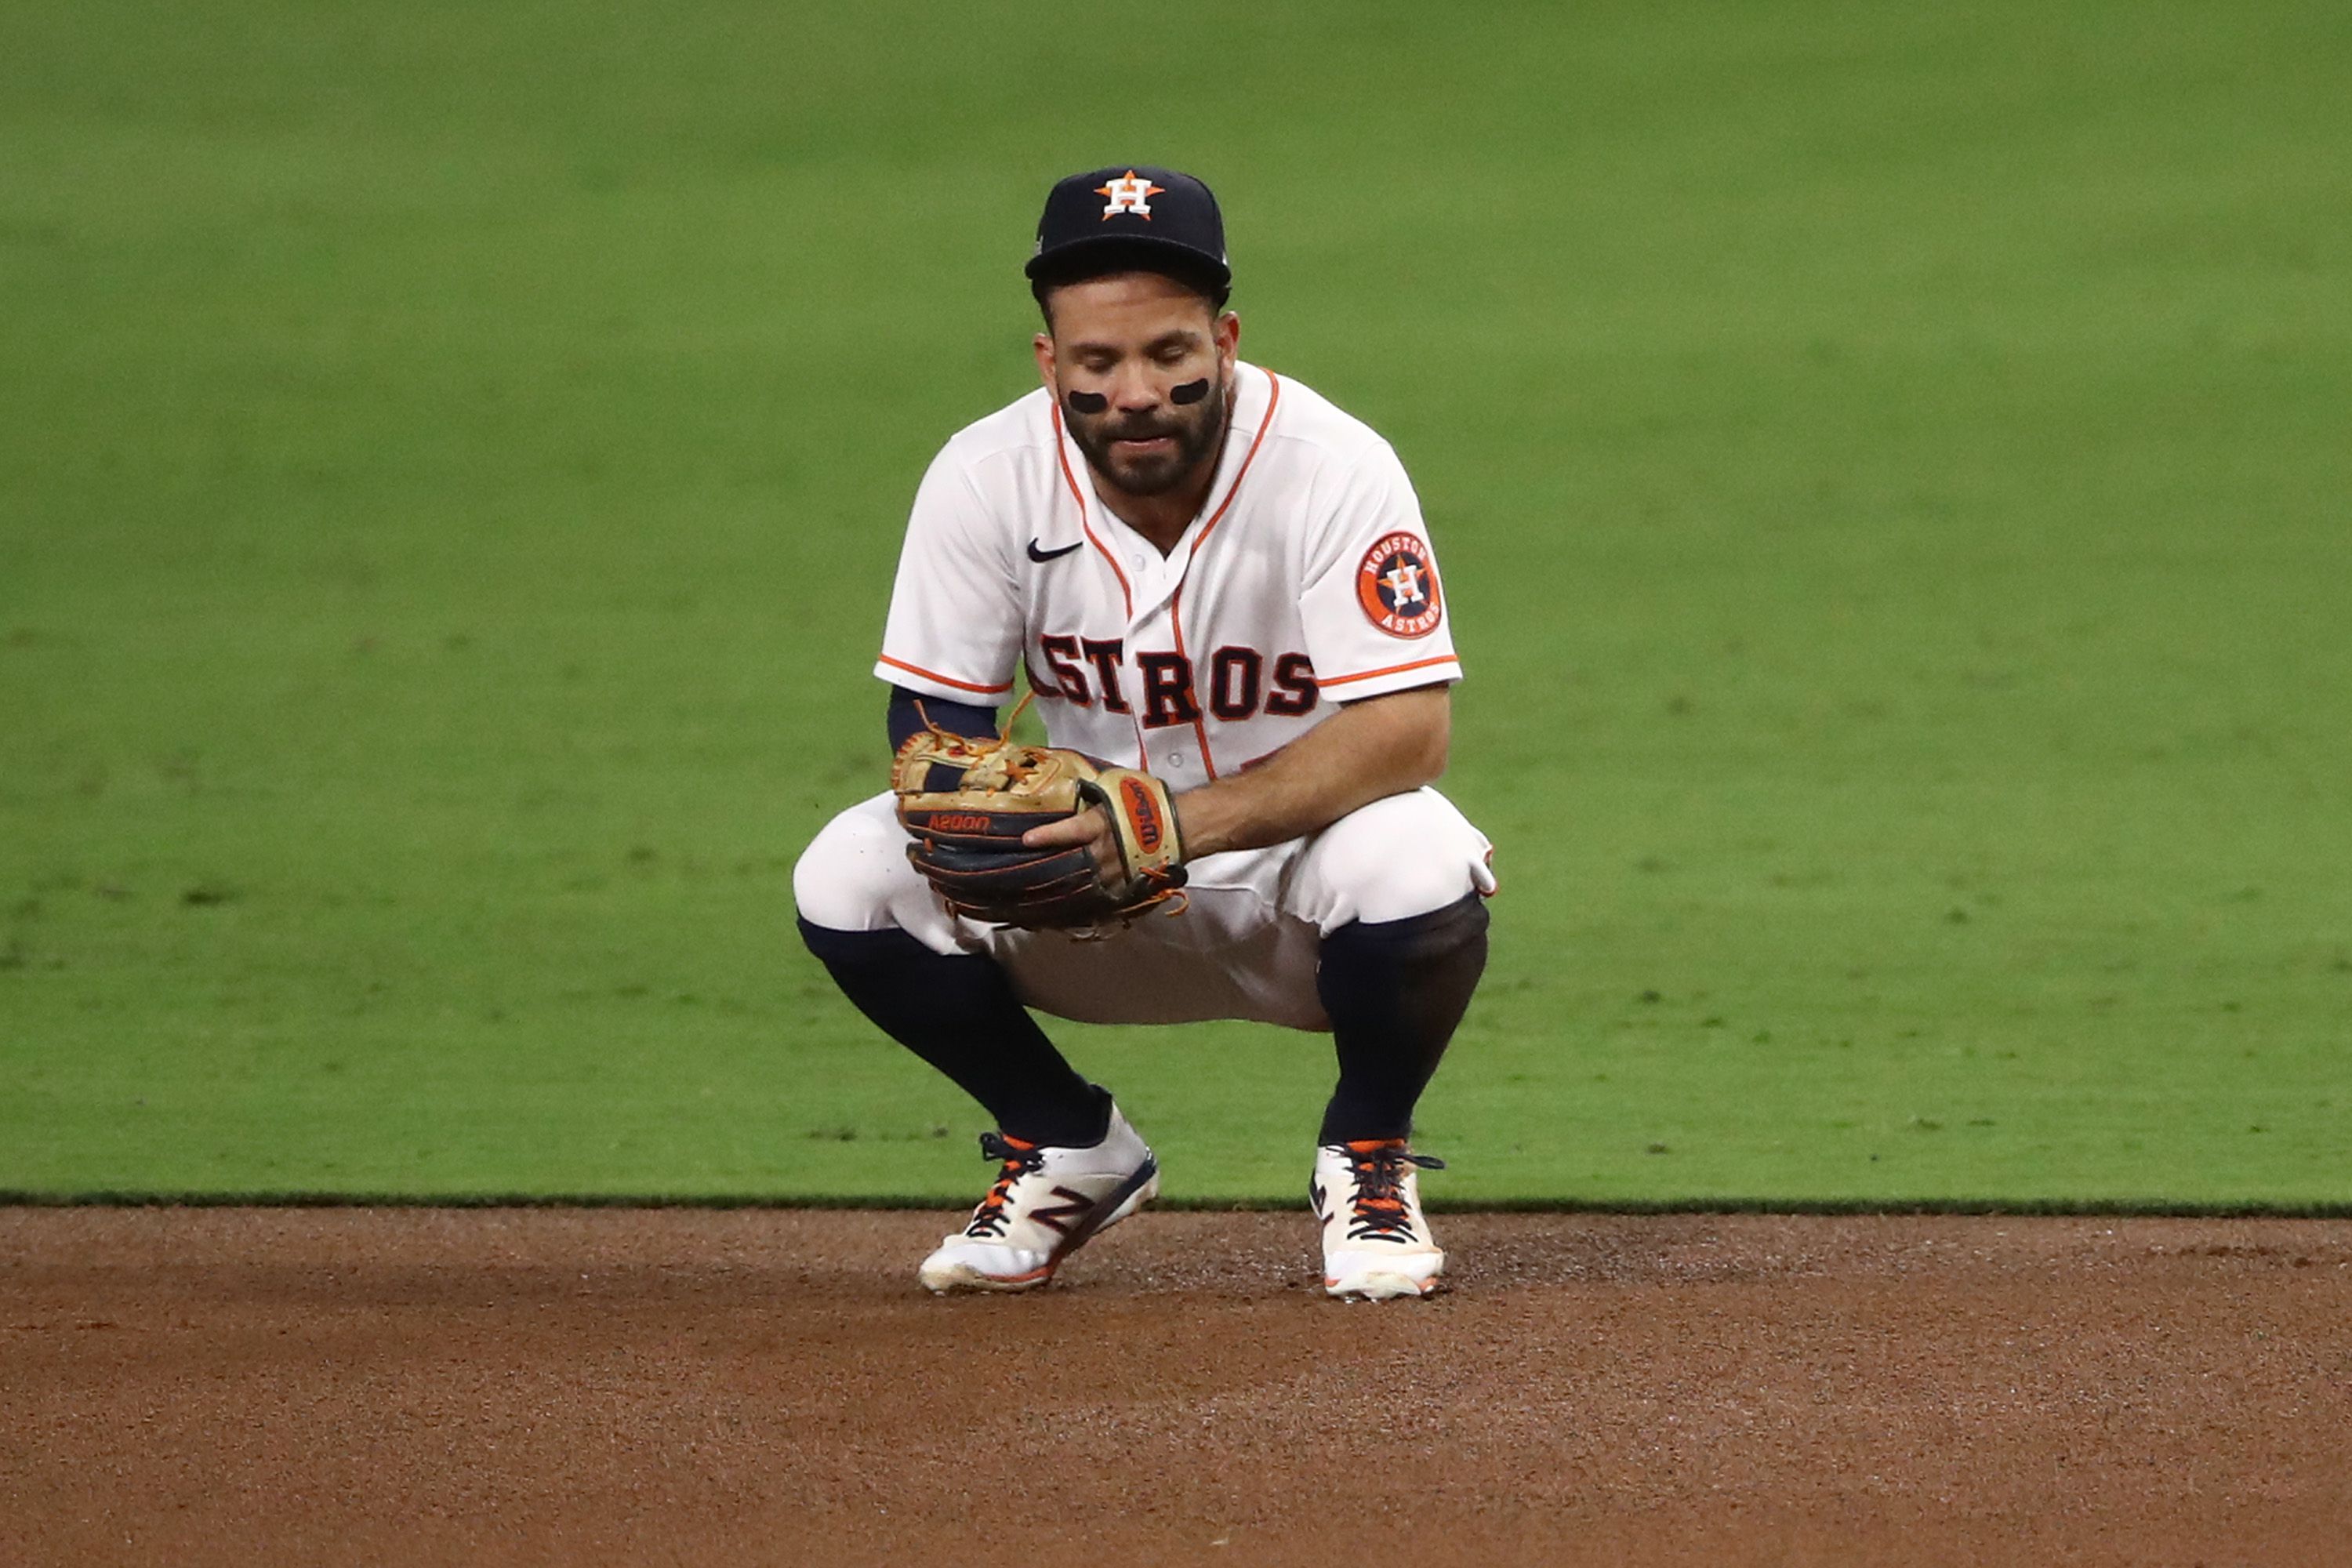 It sure seems like Jose Altuve suddenly has the yips at second base